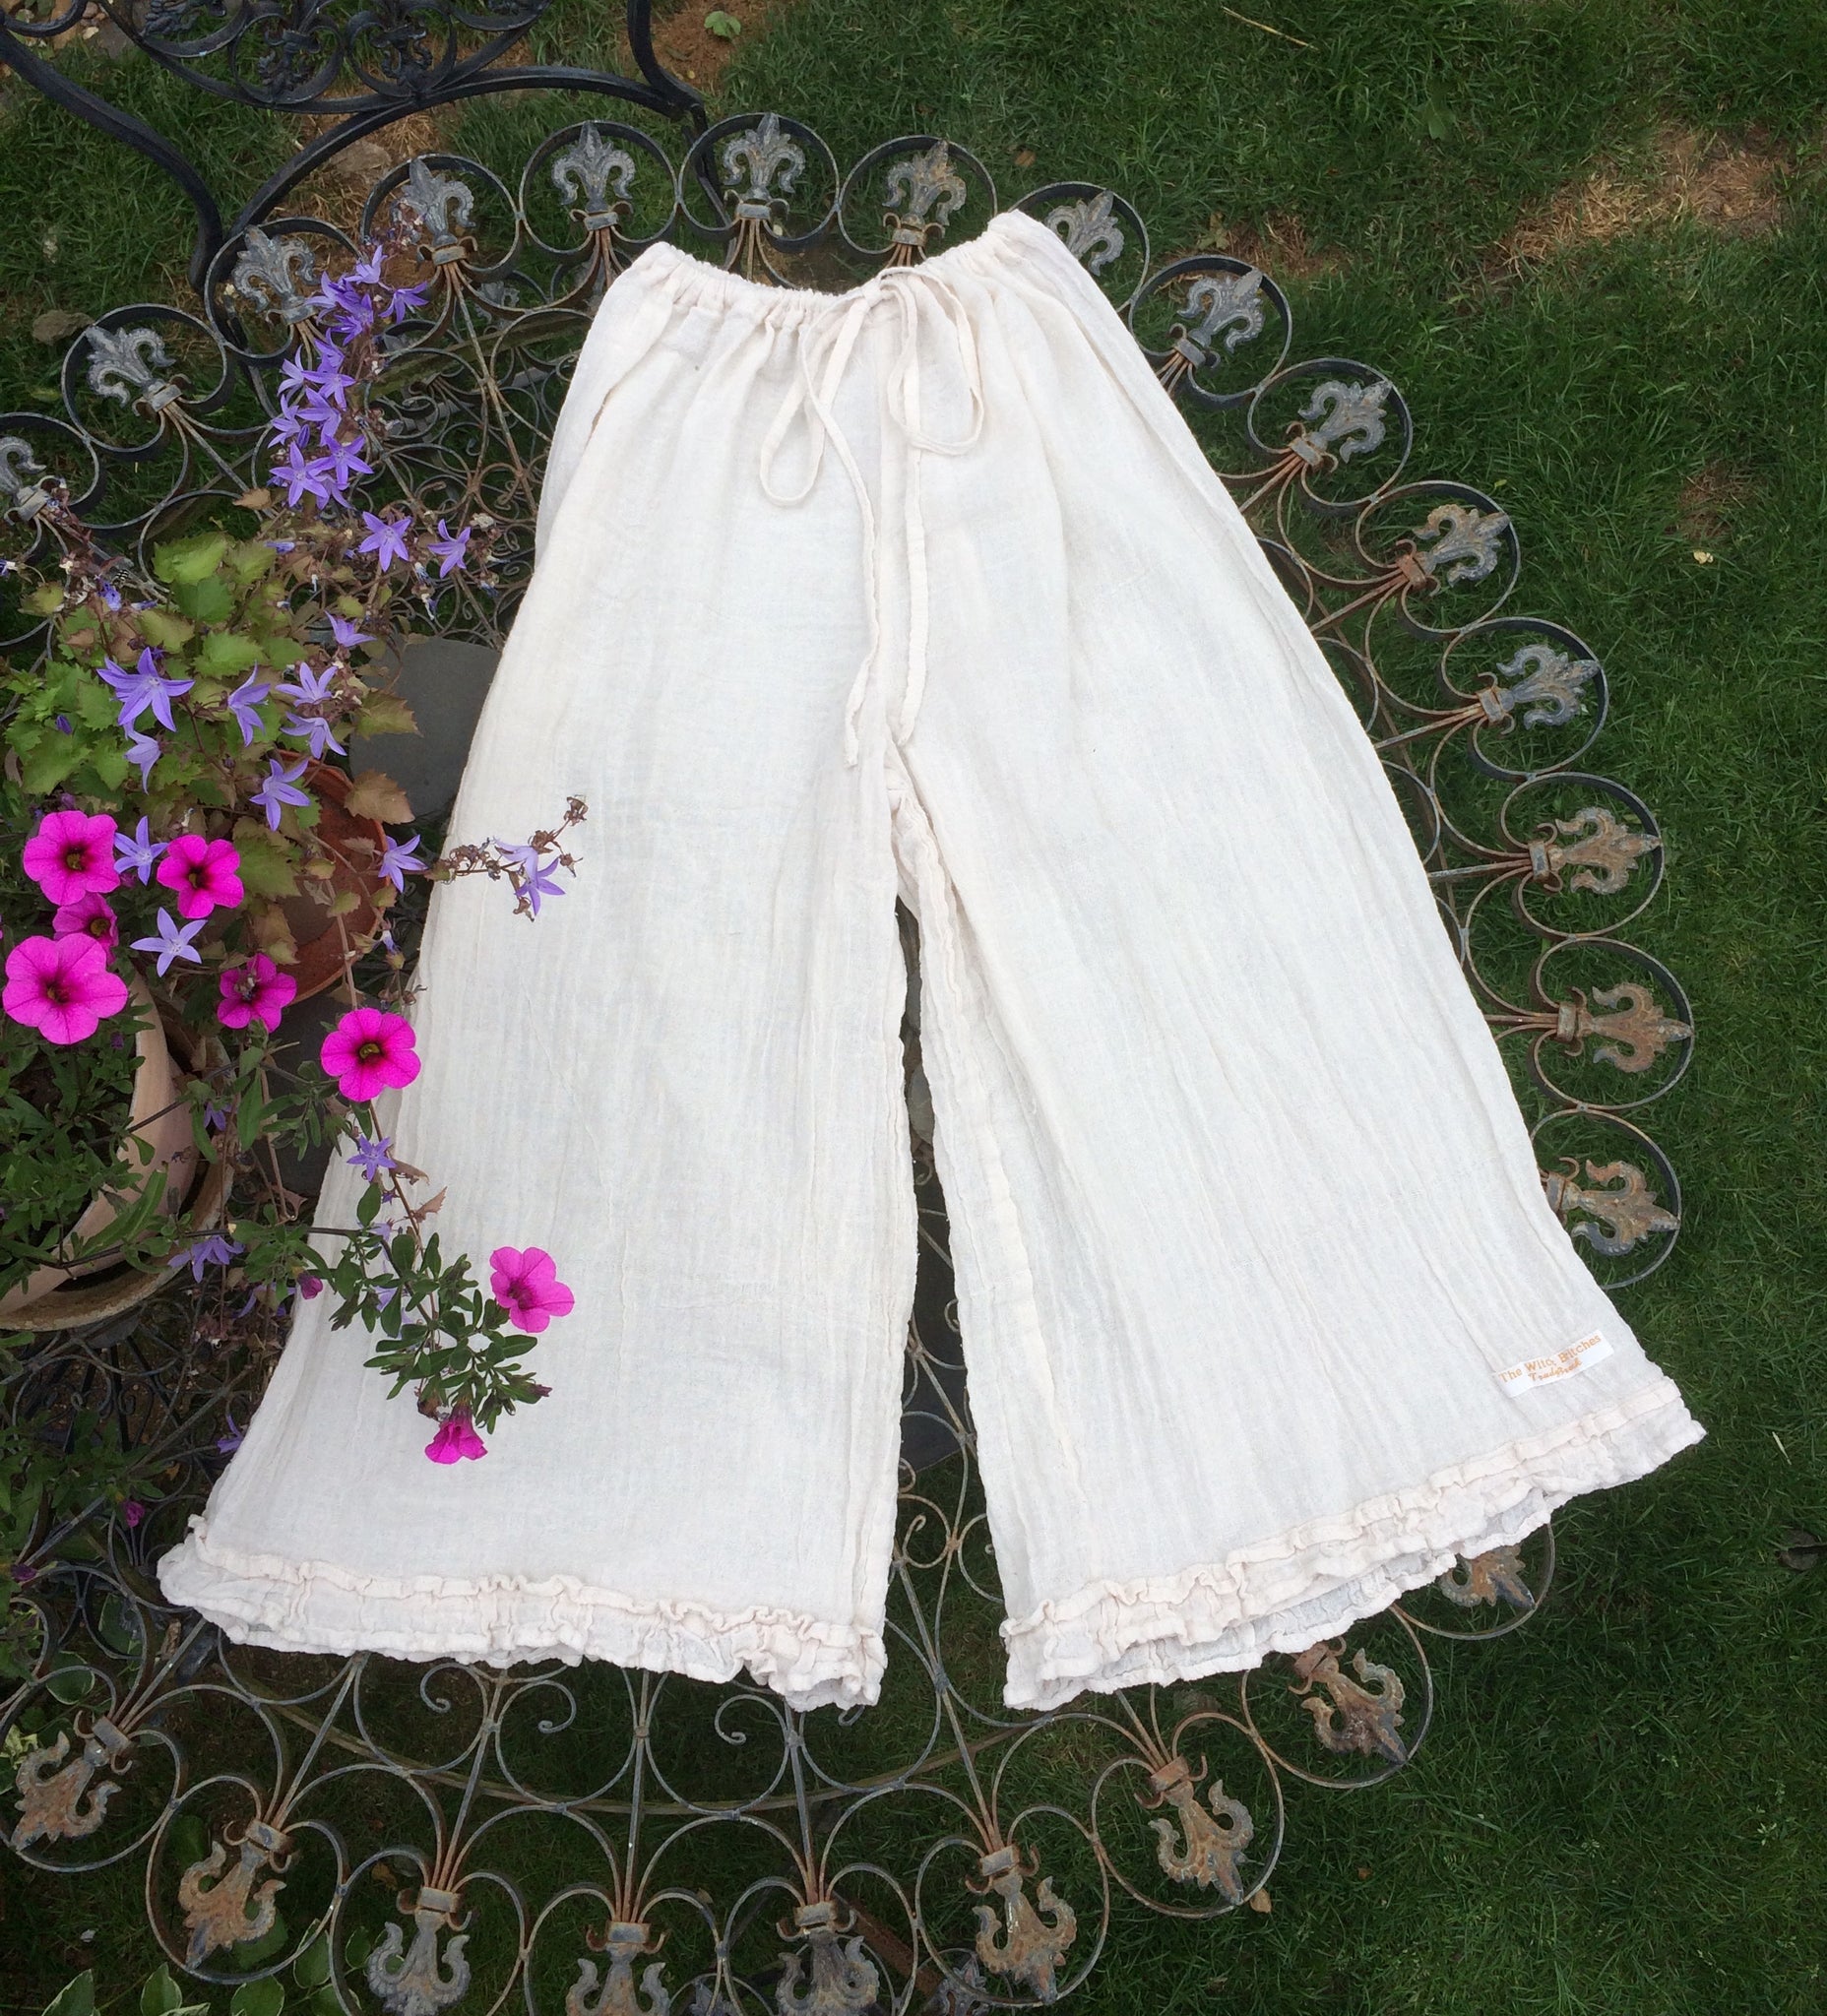 Unbleached Indian cotton muslin women's long bloomers (38")